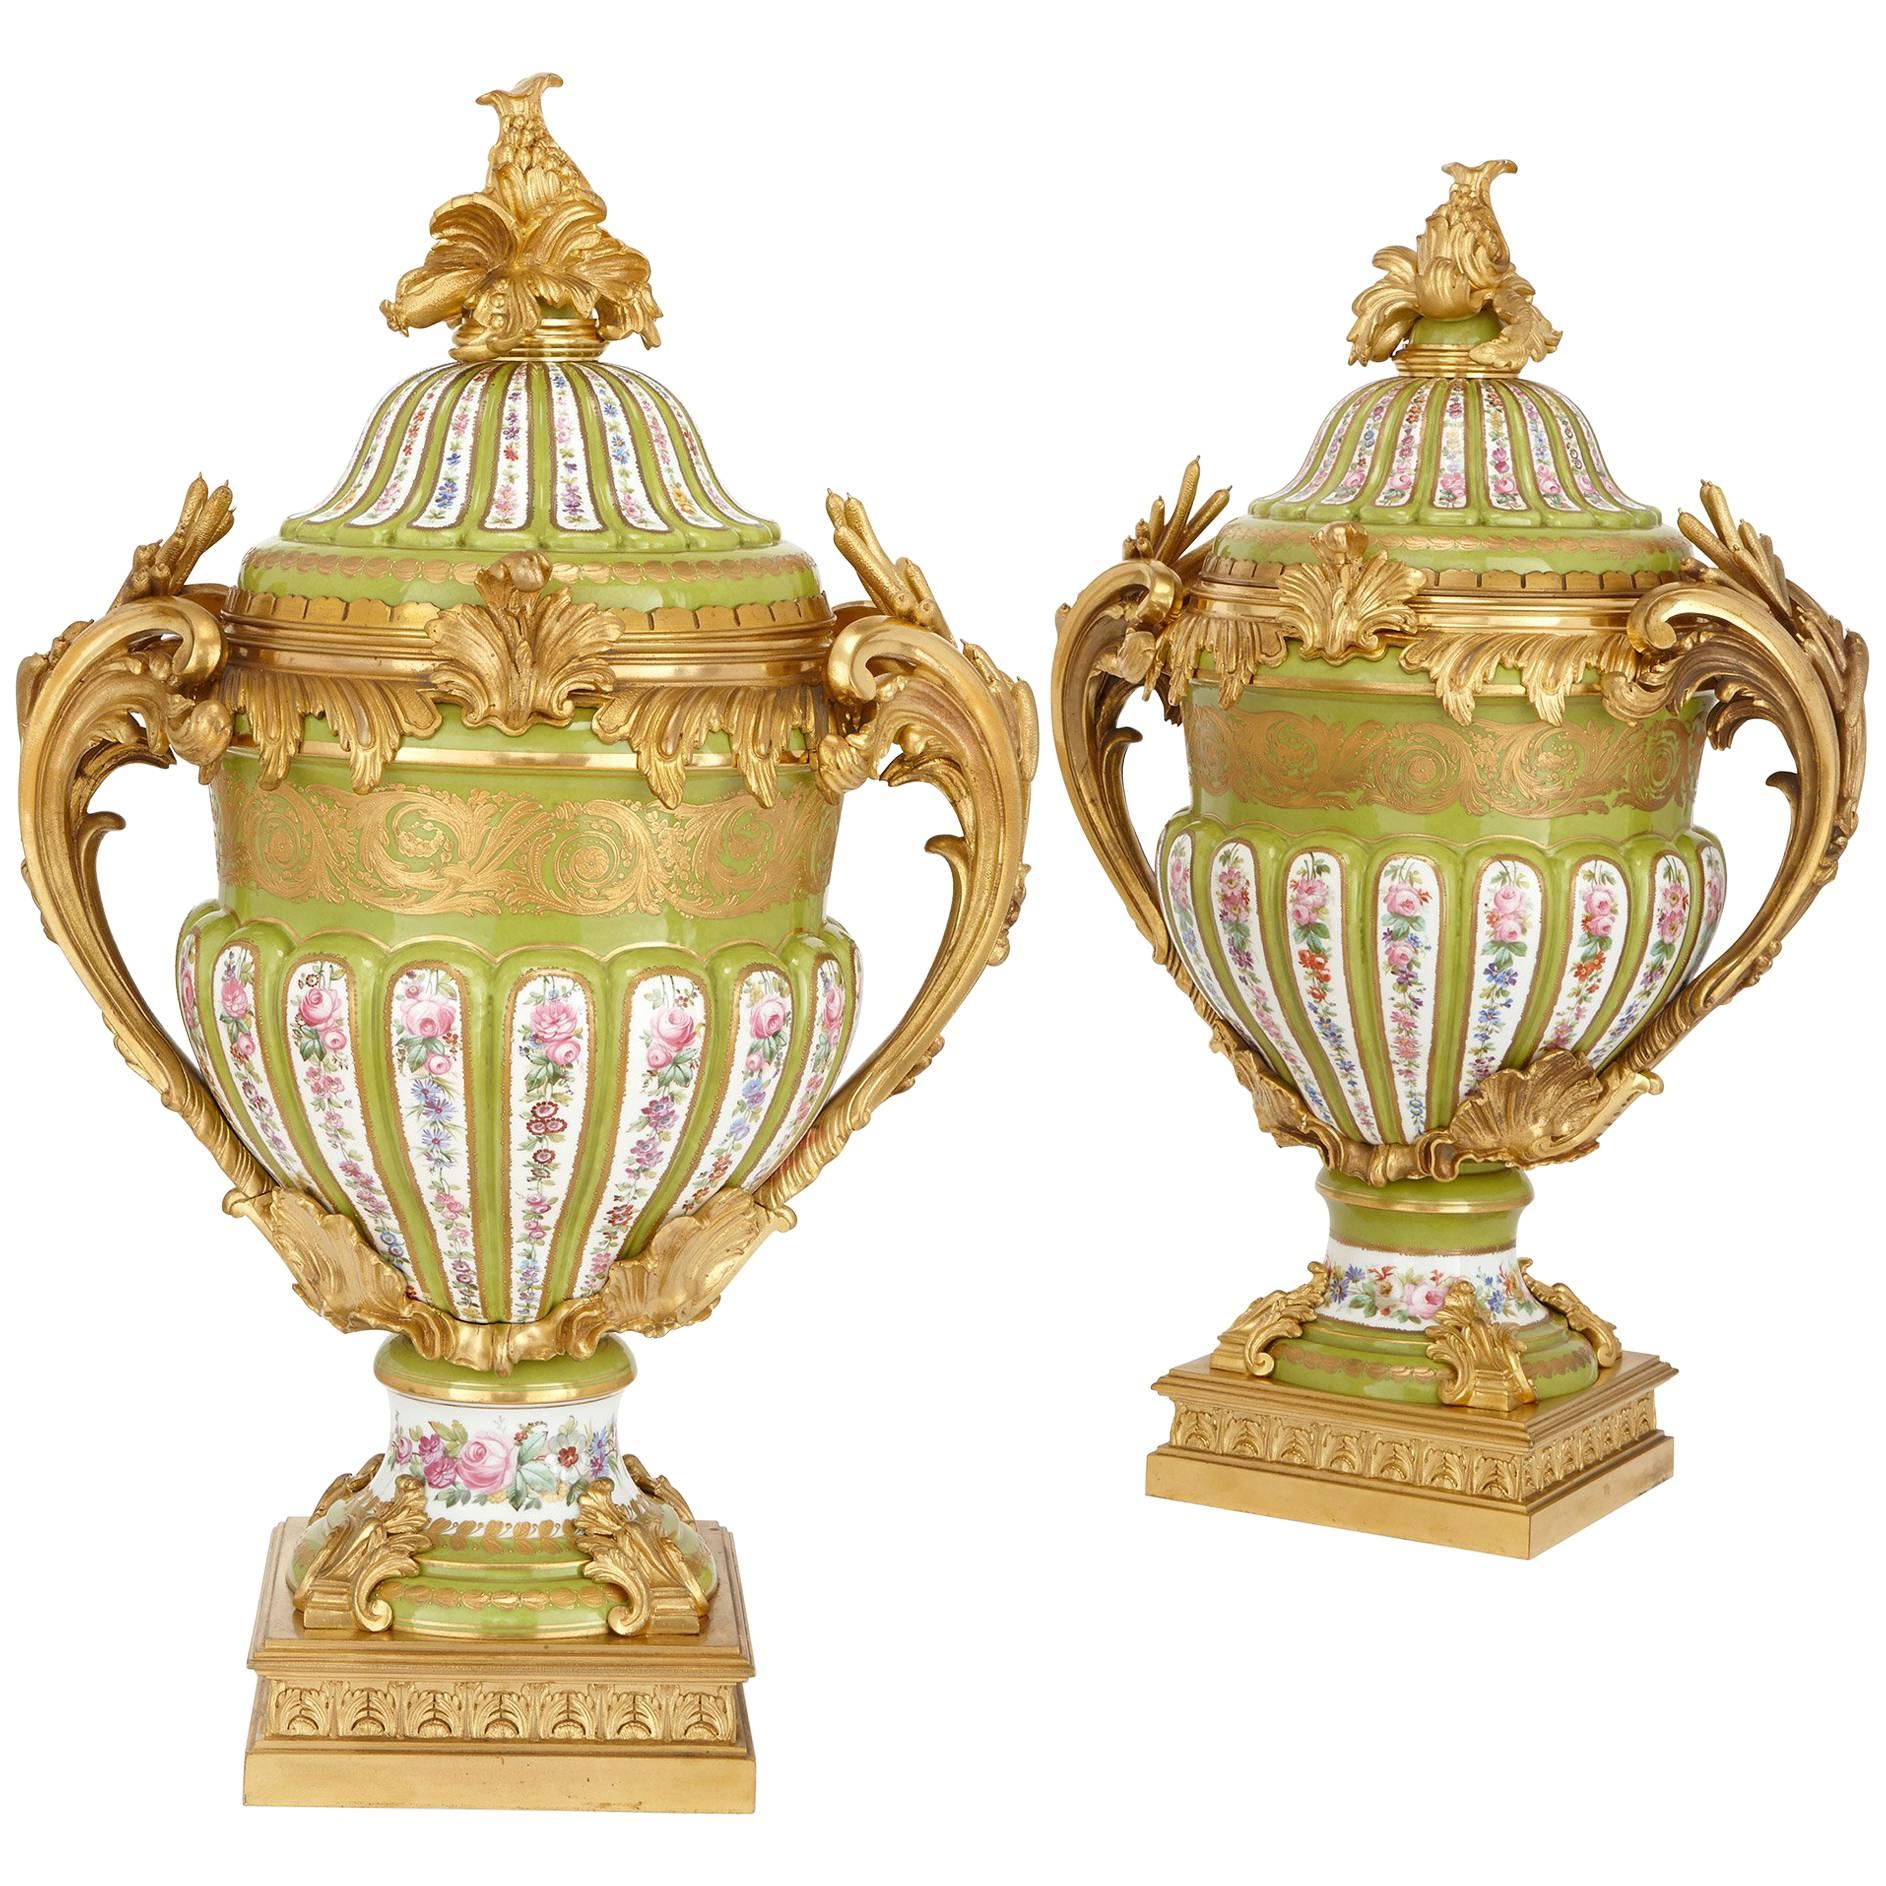 Pair of Sèvres Style Porcelain Antique French Vases with Gilt Bronze Mounts